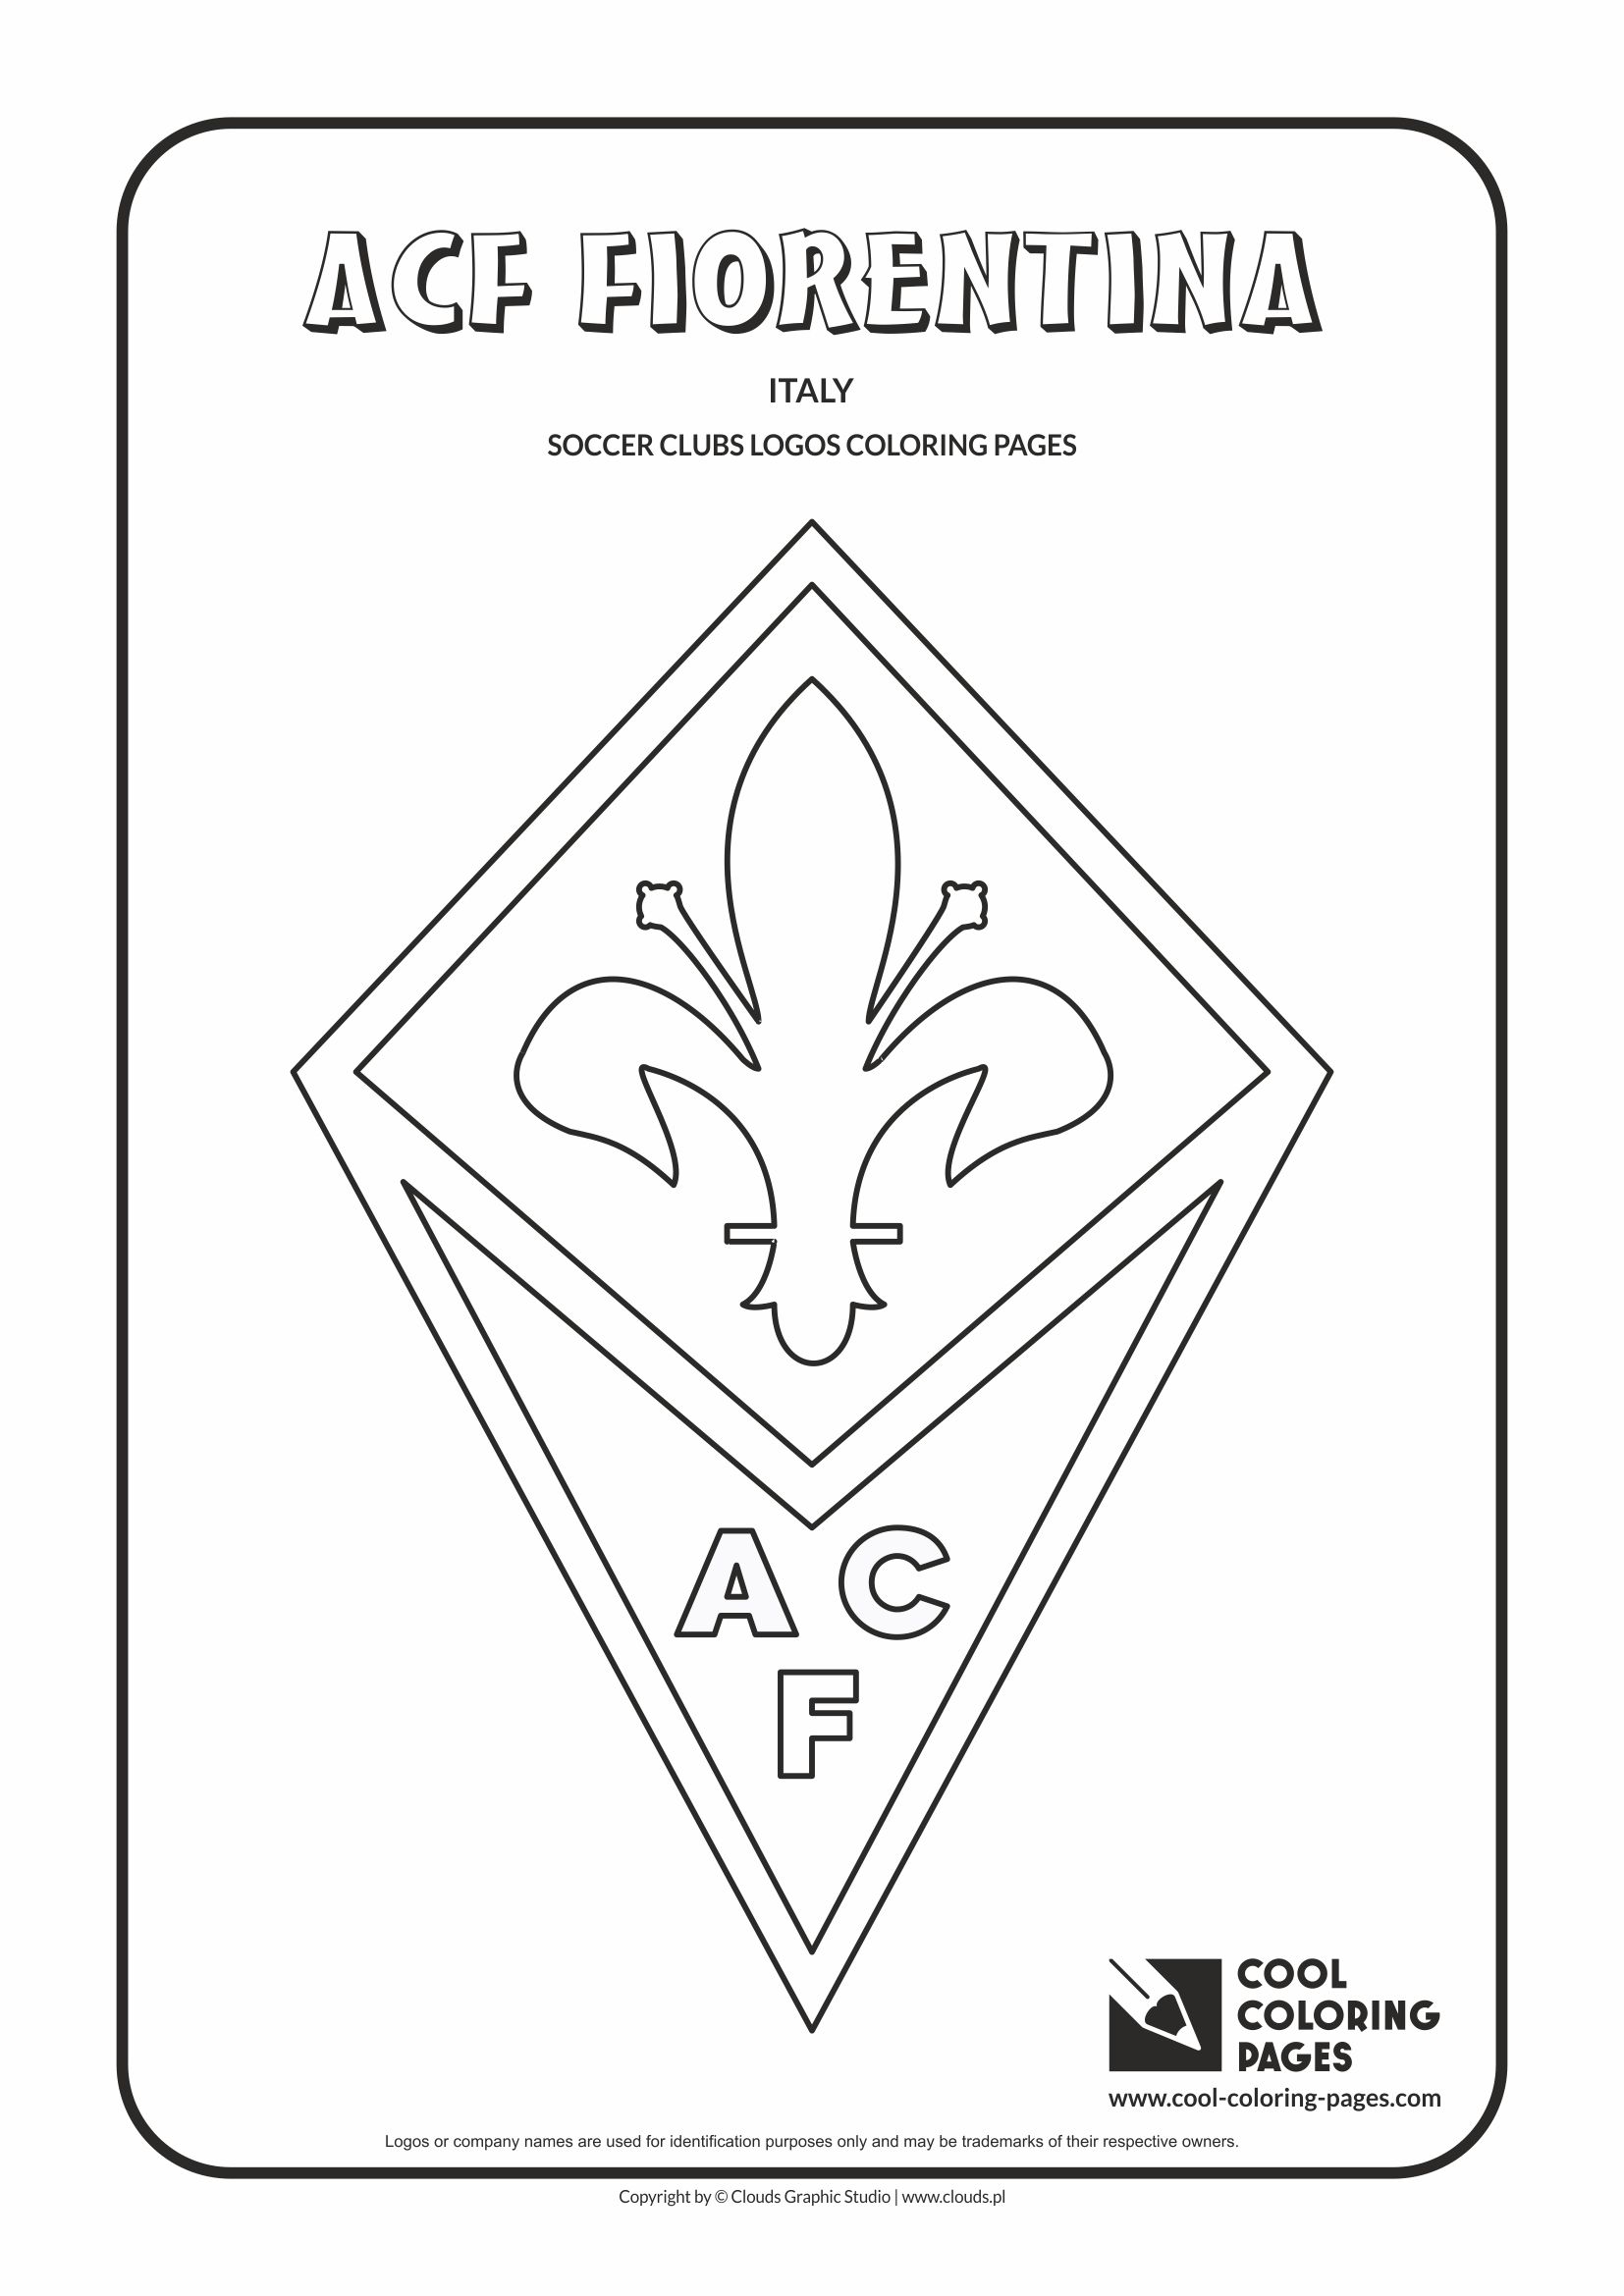 ACF Fiorentina logo coloring / Coloring page with ACF Fiorentina logo / ACF Fiorentina logo colouring page.